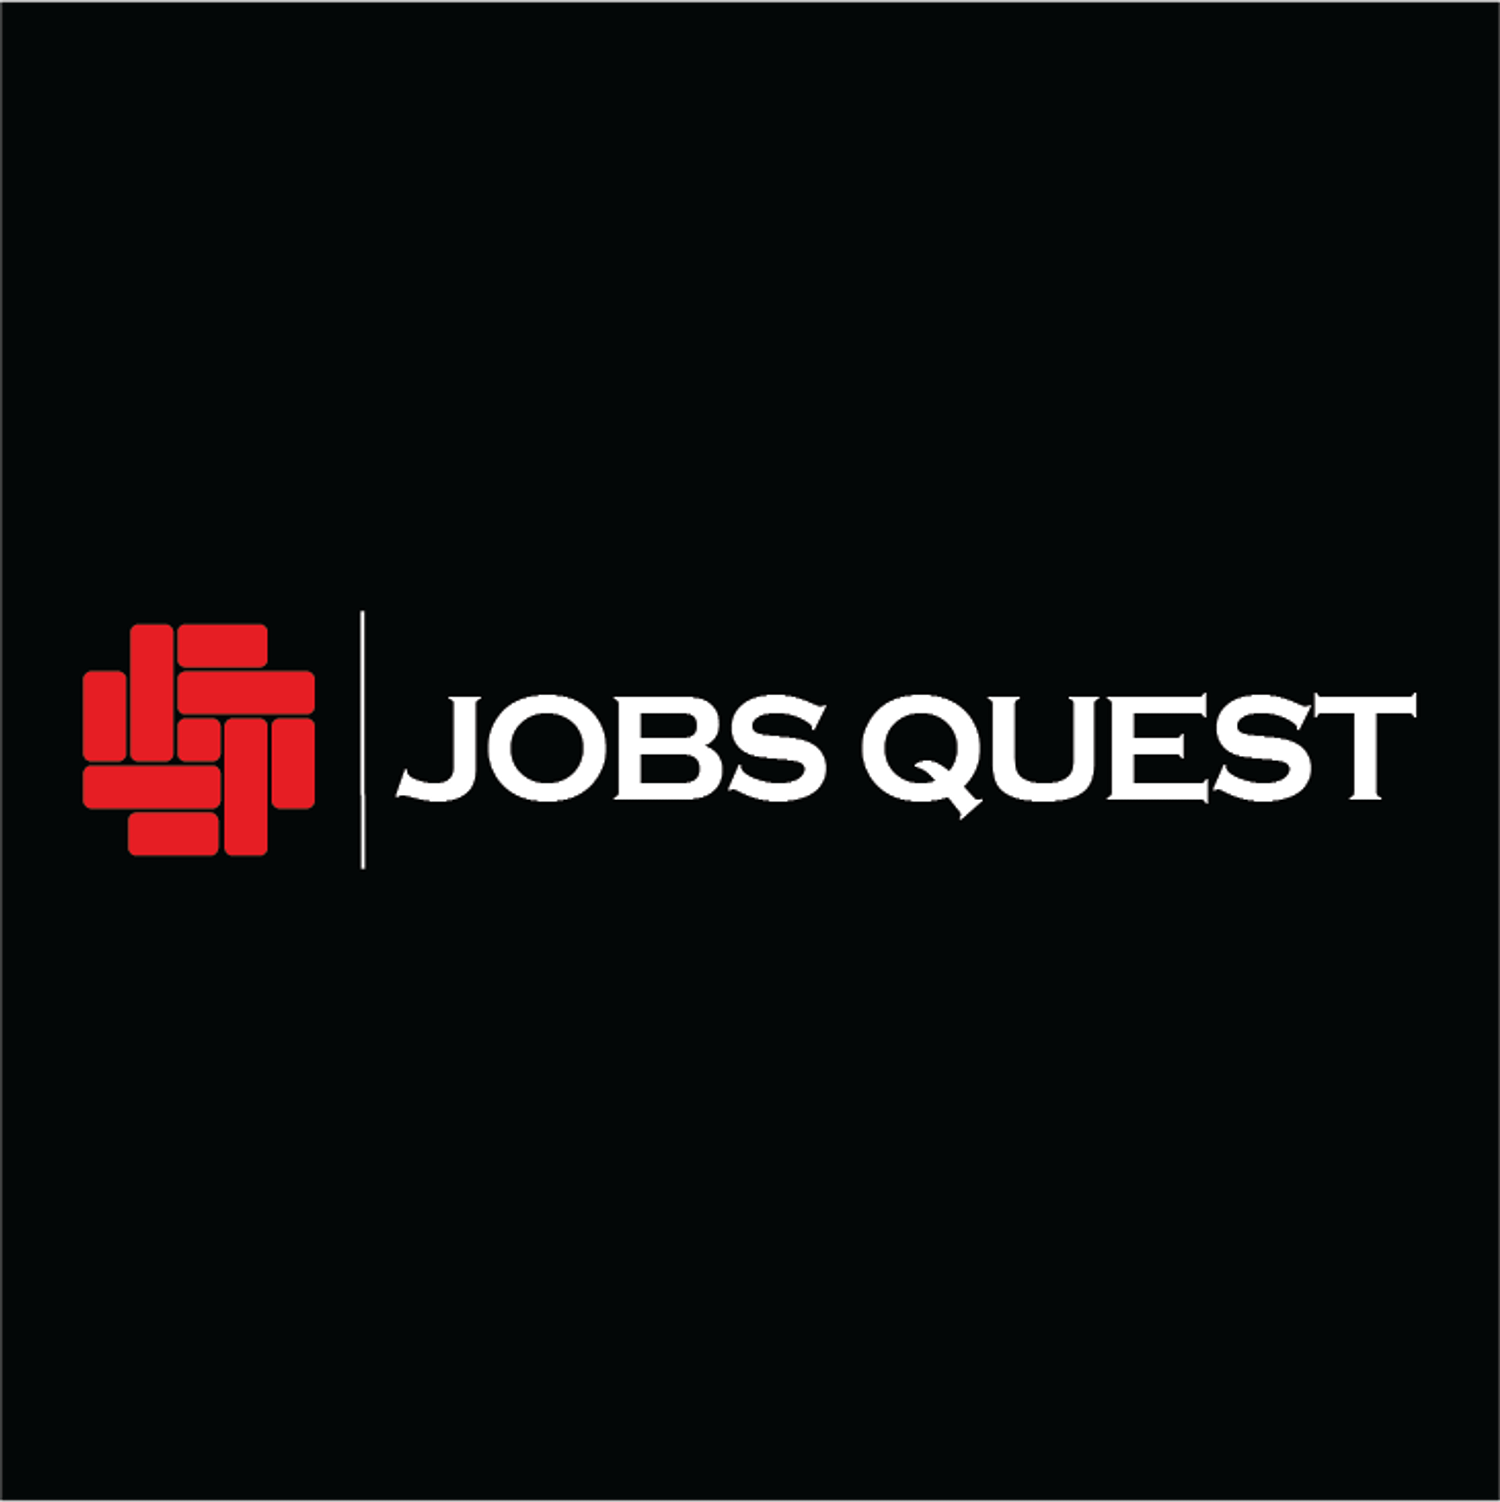 JobsQuest is a job aggregrator platform with a focus on sourcing jobs across tech and product for the Indian audience